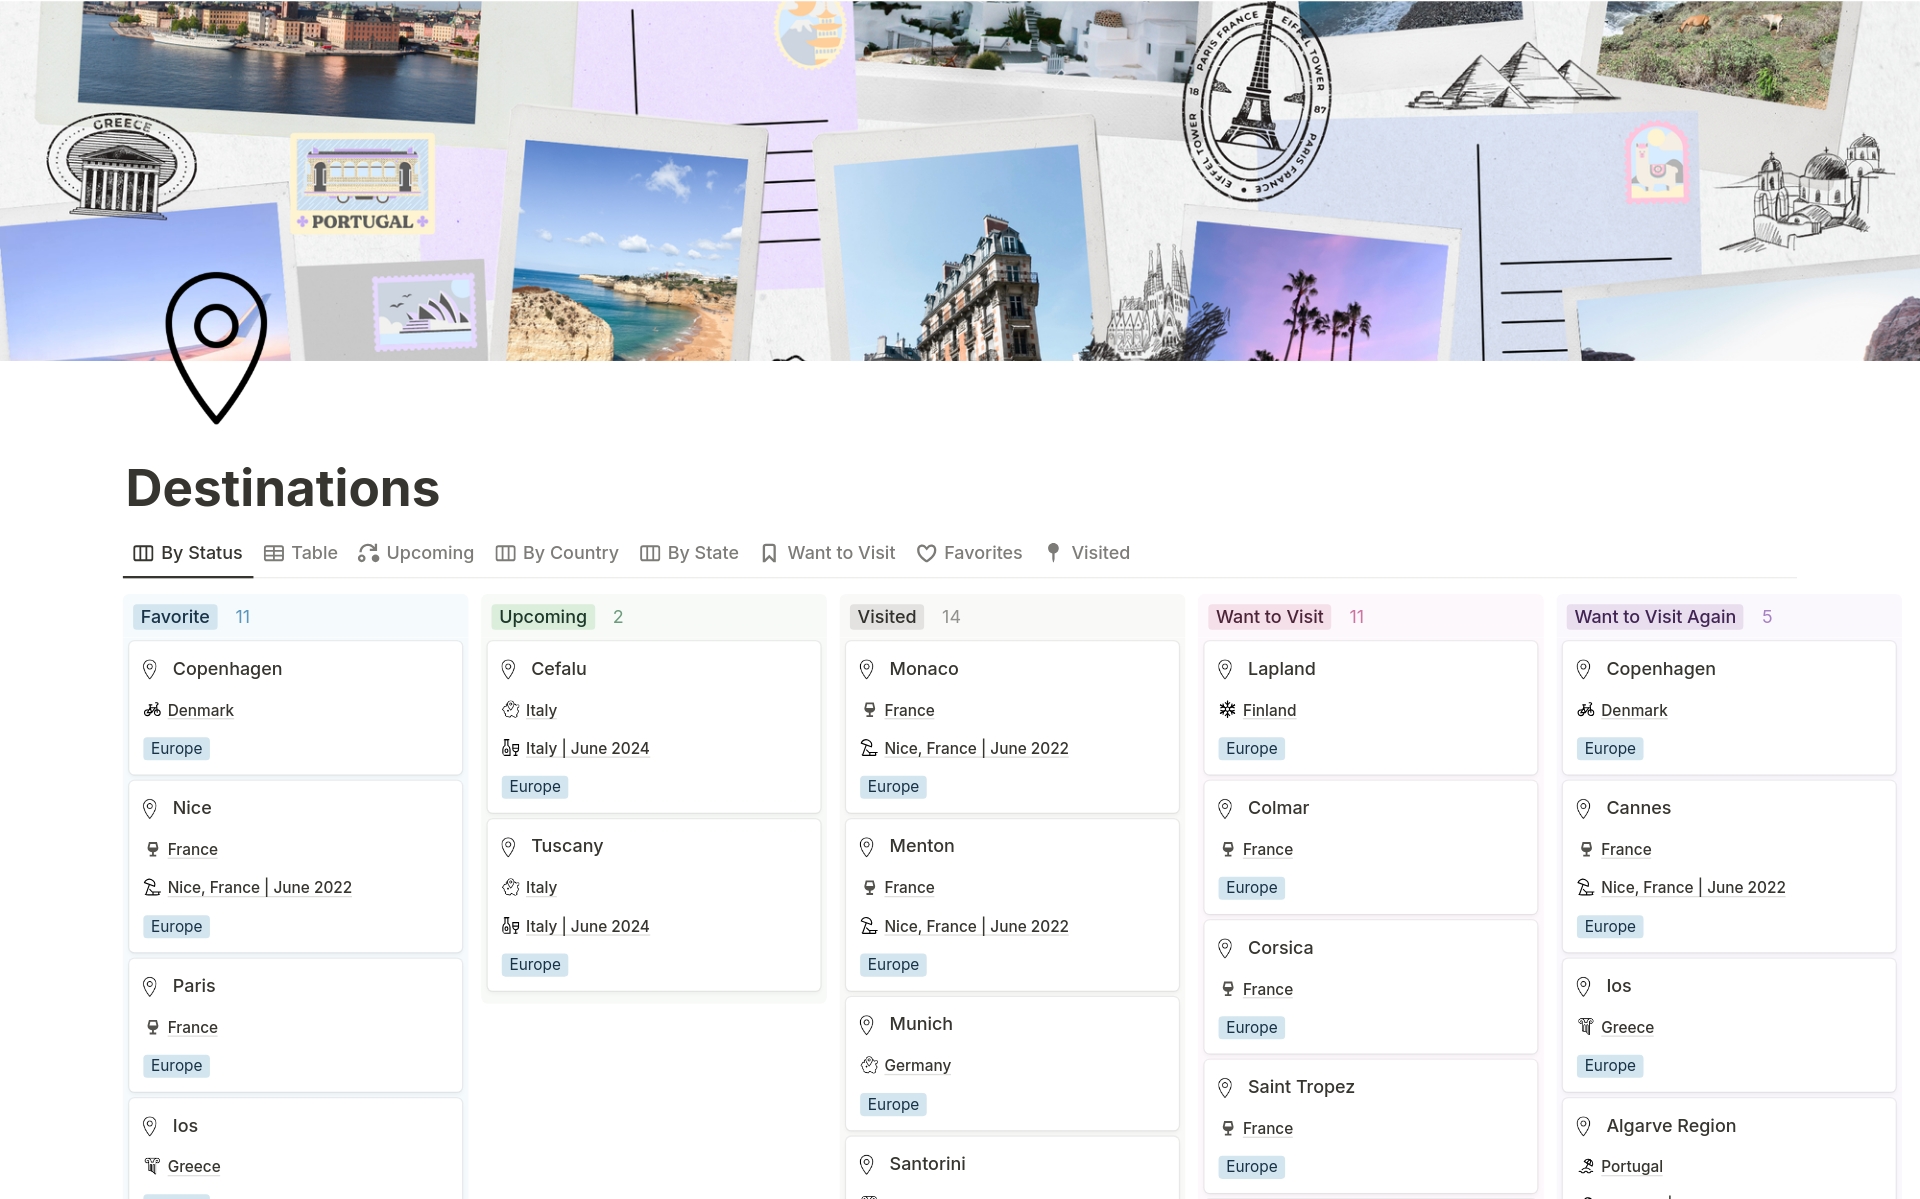 All-in-one travel planner and journal that provides a way to completely organize everything you want for travel planning. Custom trip itinerary that syncs with notion calendar, travel journal, save future destination ideas, packing list, bucket list, and more 😊

